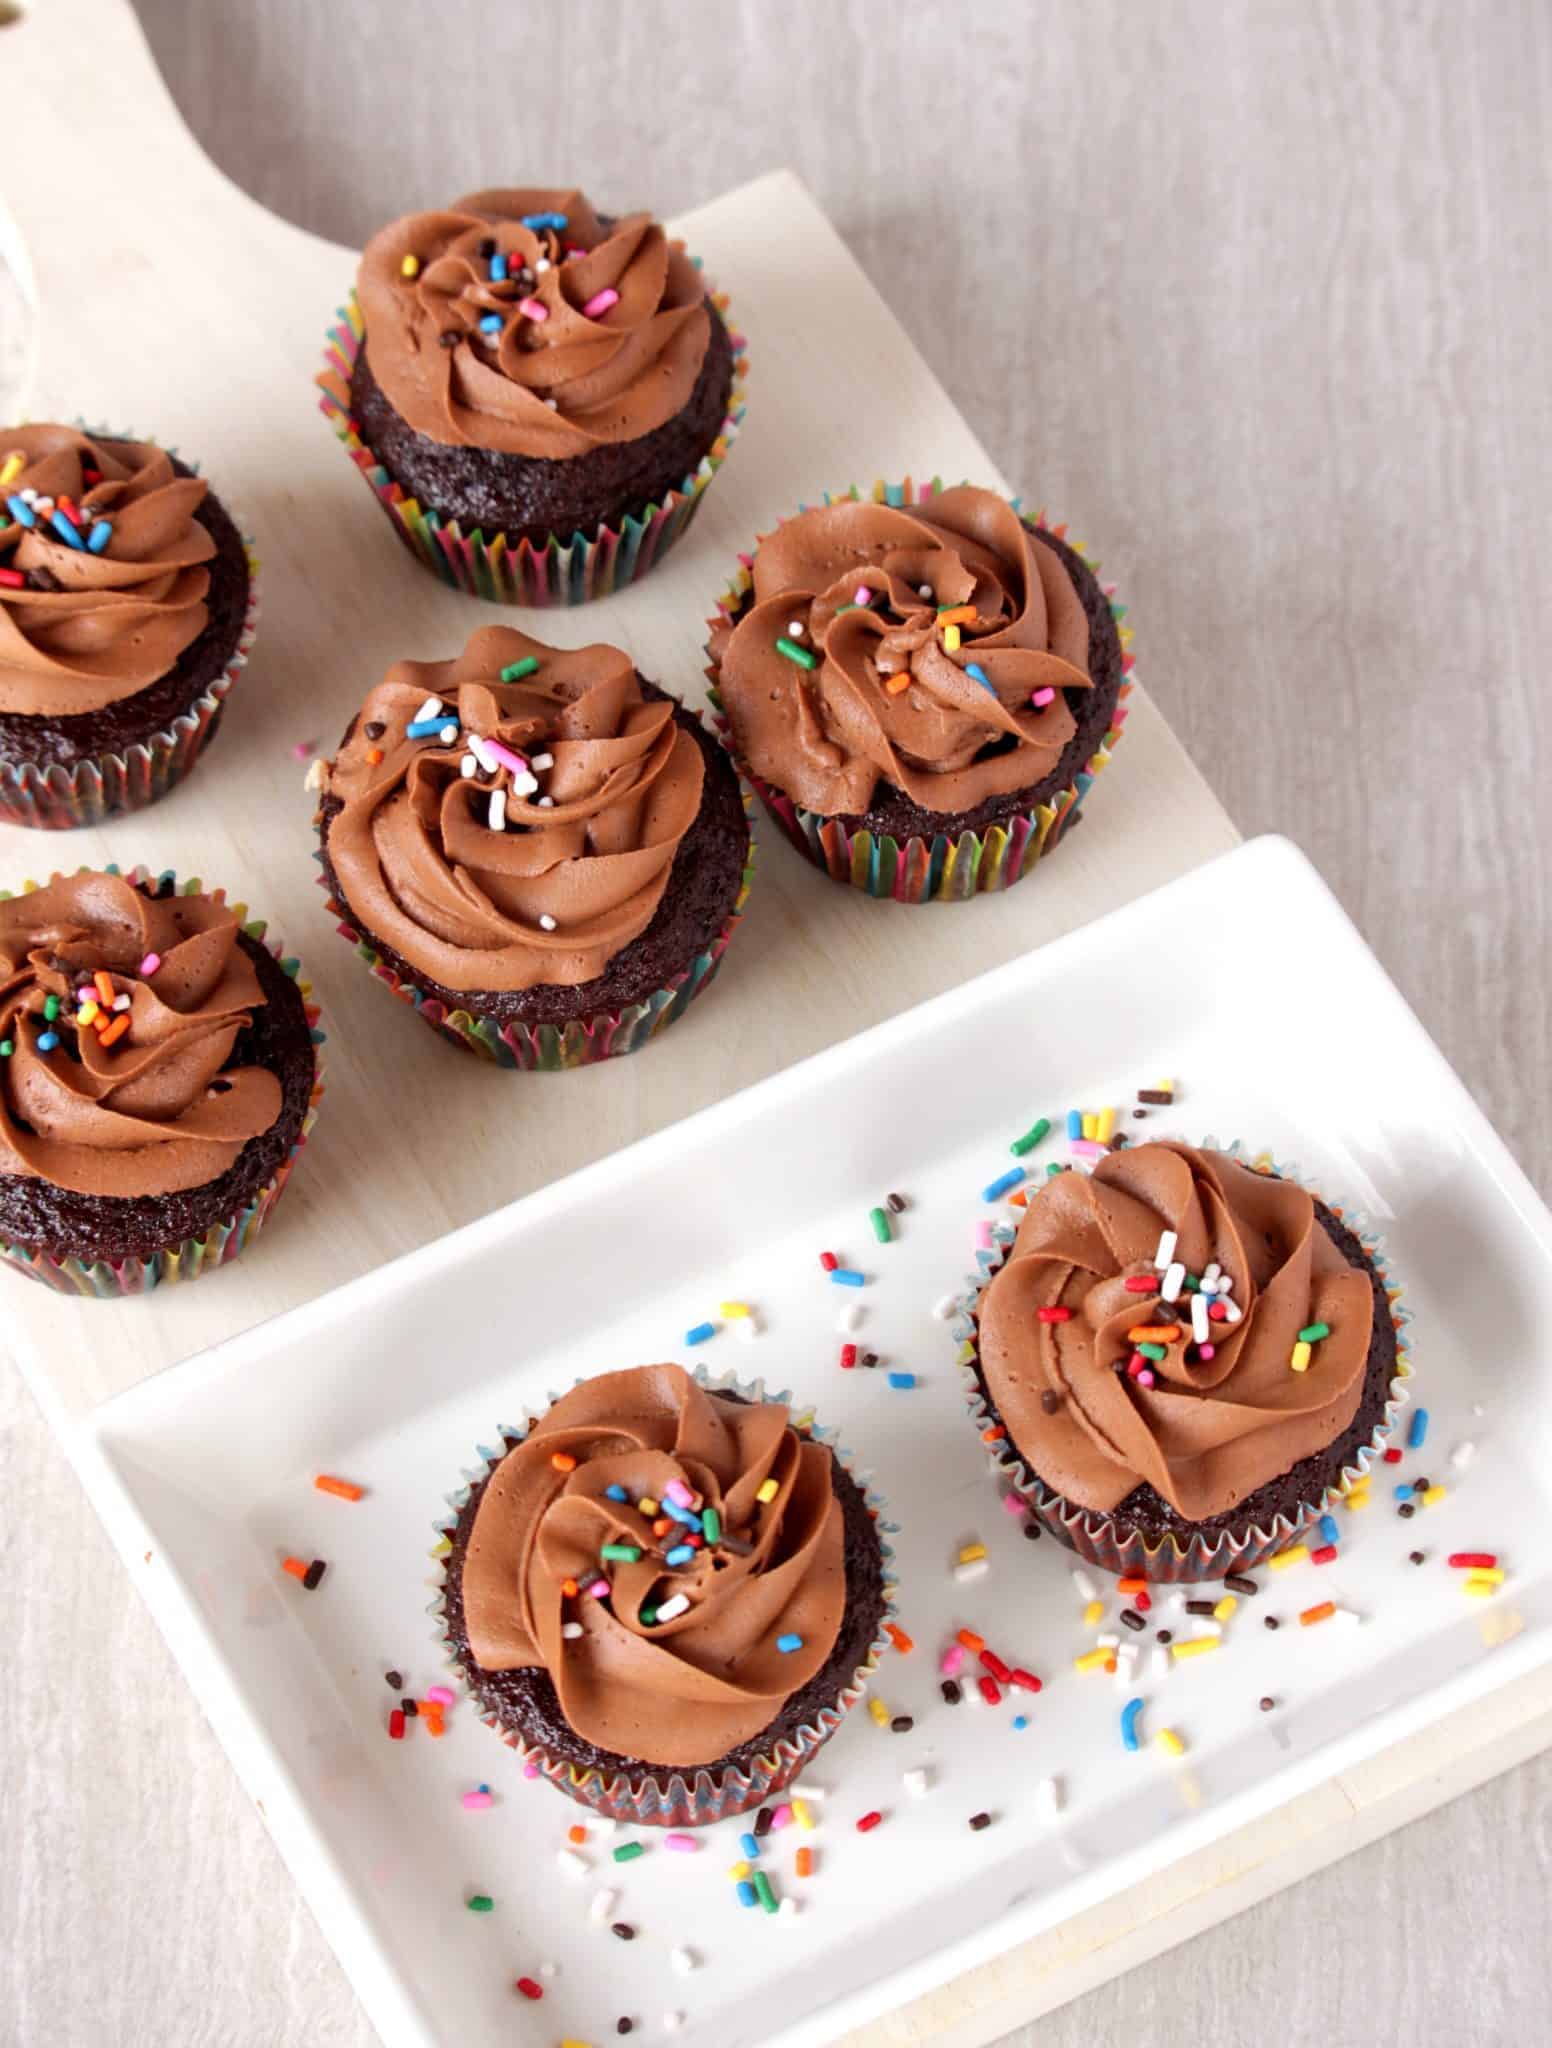 Chocolate Cupcakes with Chocolate Buttercream Frosting garnish in a Plate